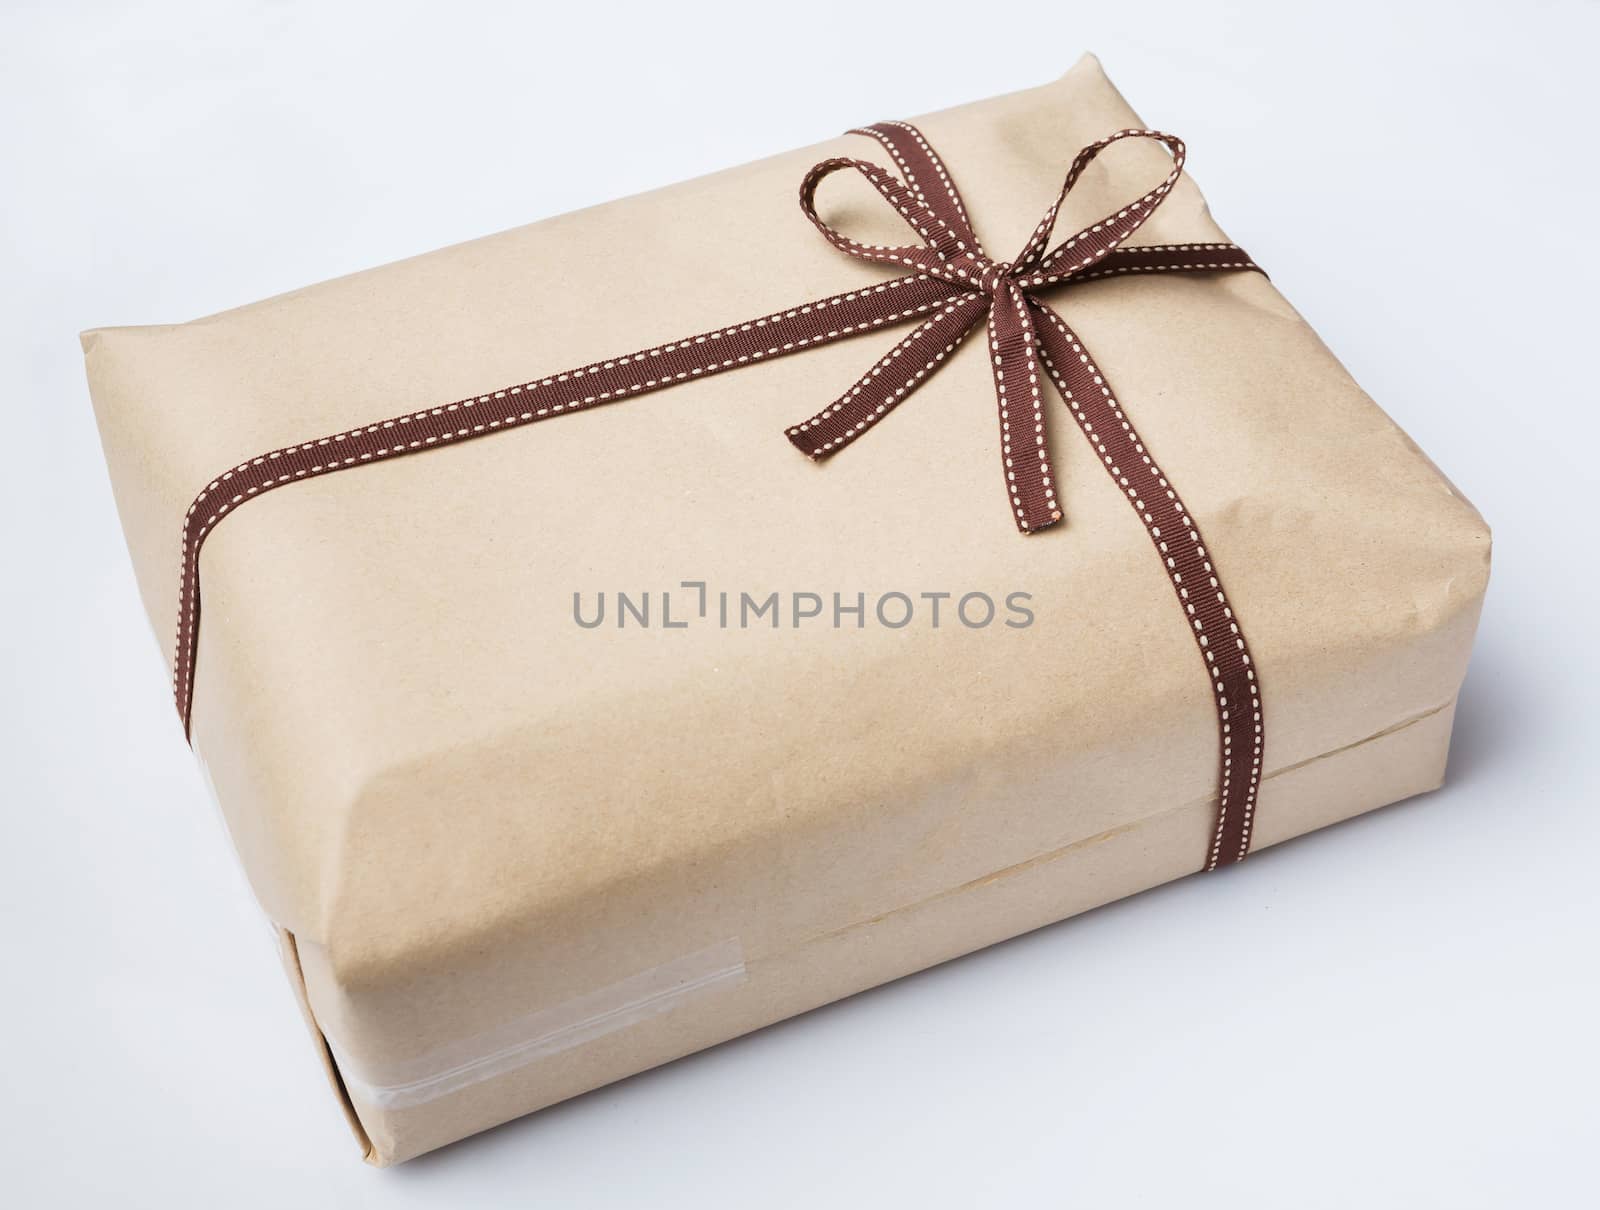 Wrapped gift box and bow tie by smuay